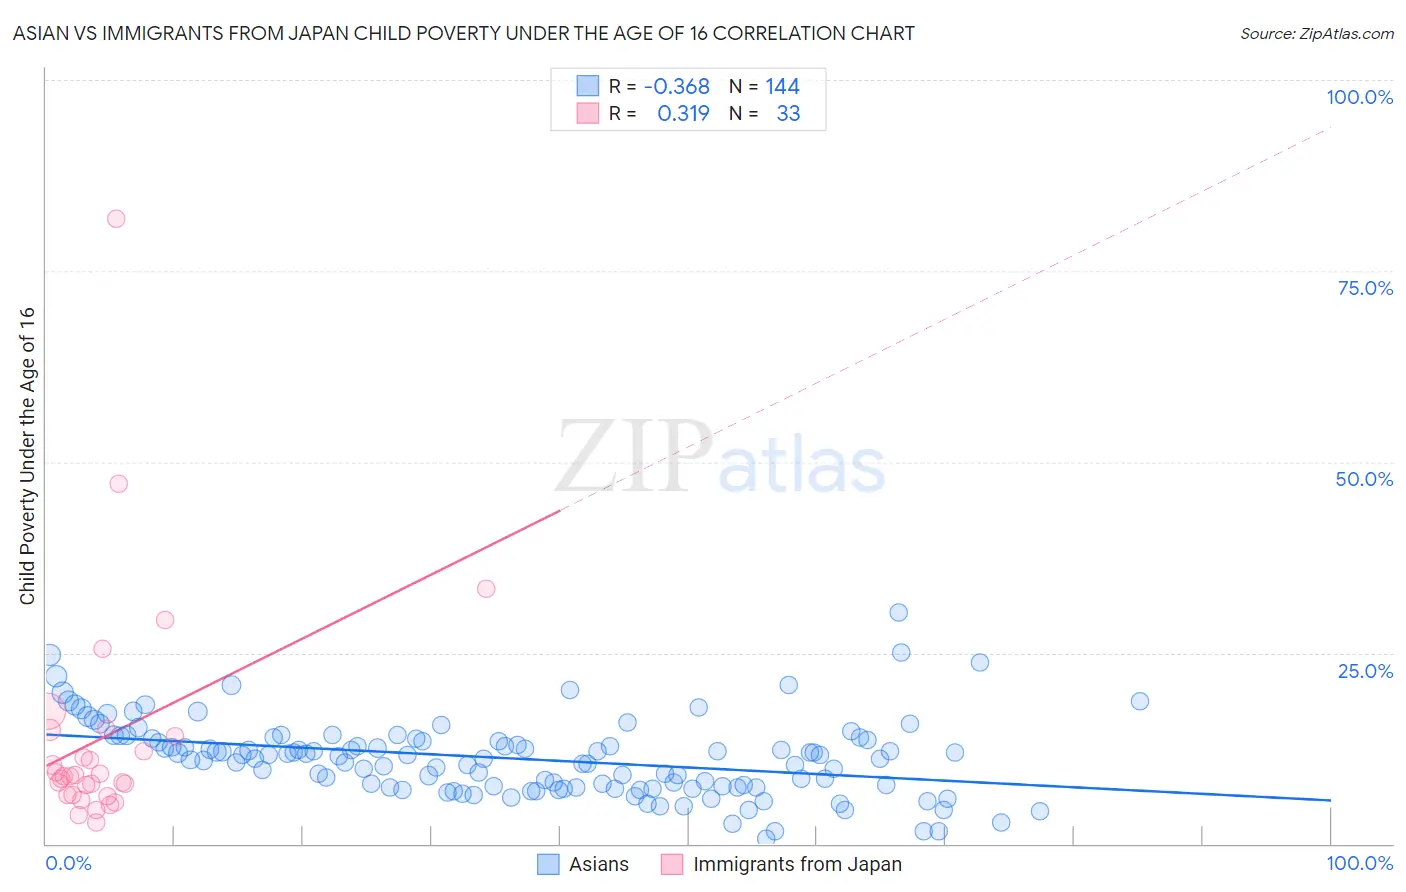 Asian vs Immigrants from Japan Child Poverty Under the Age of 16